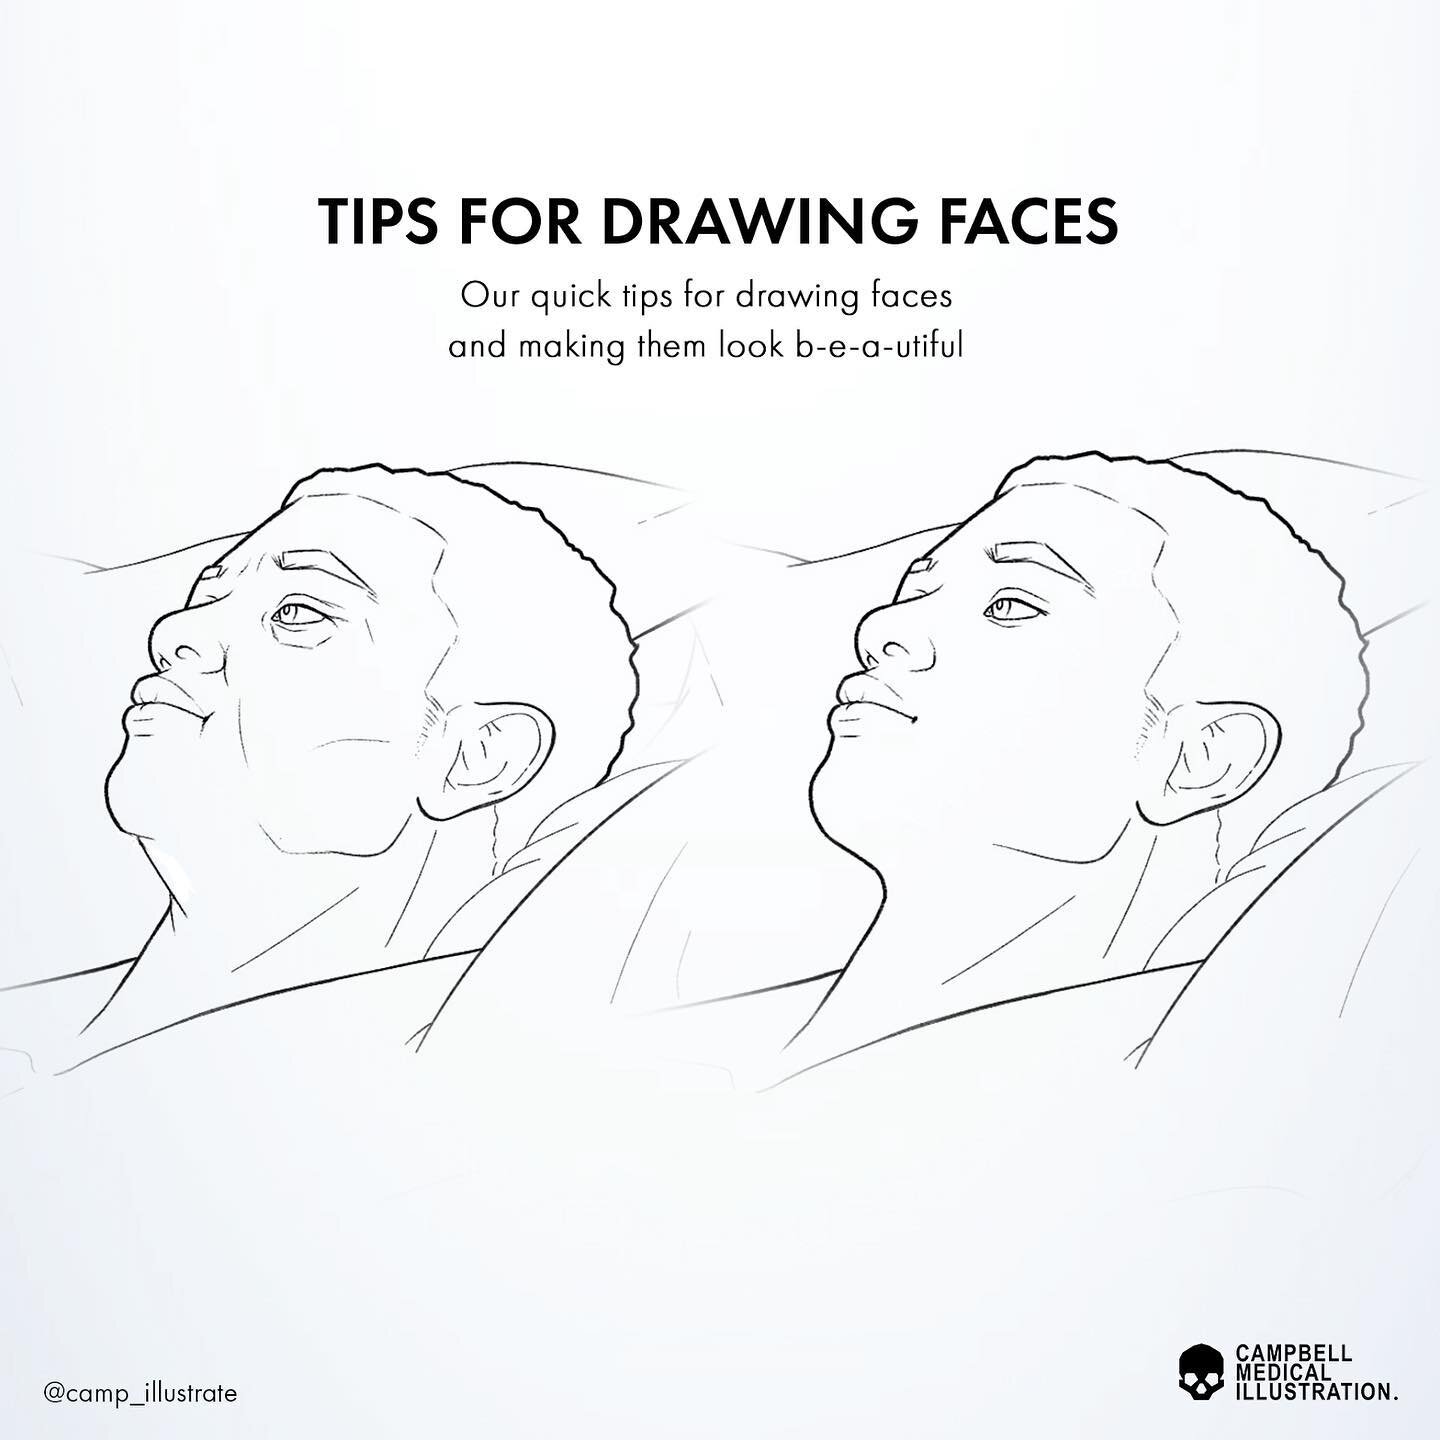 Hi friends! We wanted to wrap up our figure drawing illustration posts with some quick tips we&rsquo;ve picked up throughout the years. This is something we usually share as part of our internal training library. Hope you enjoy and please do share an